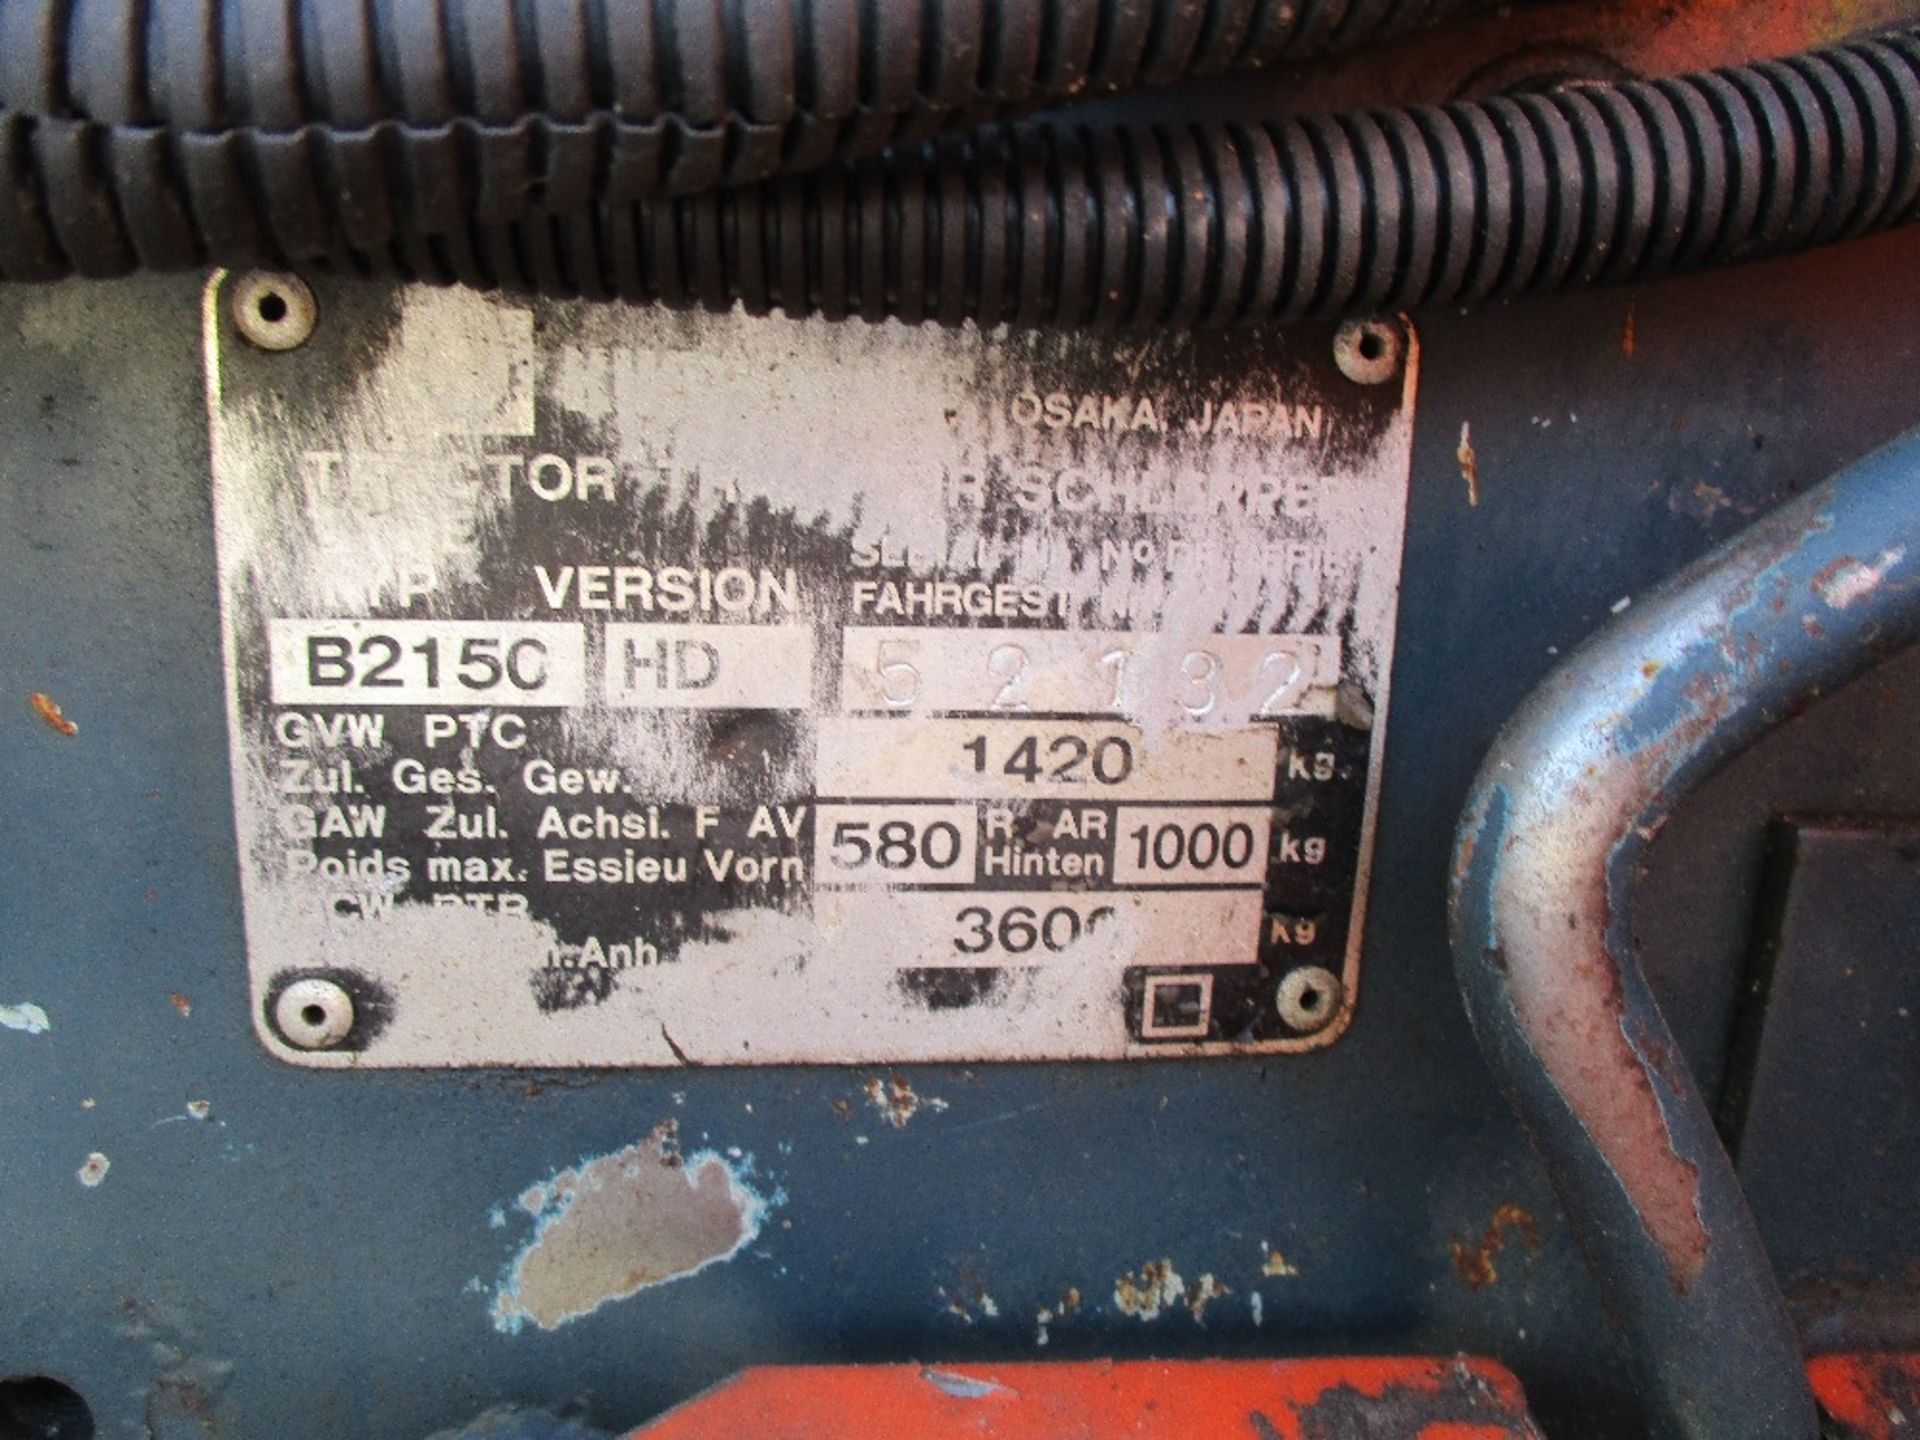 KUBOTA B2150 4WD COMPACT TRACTOR WITH HYDRASTATIC DRIVE - Image 4 of 7